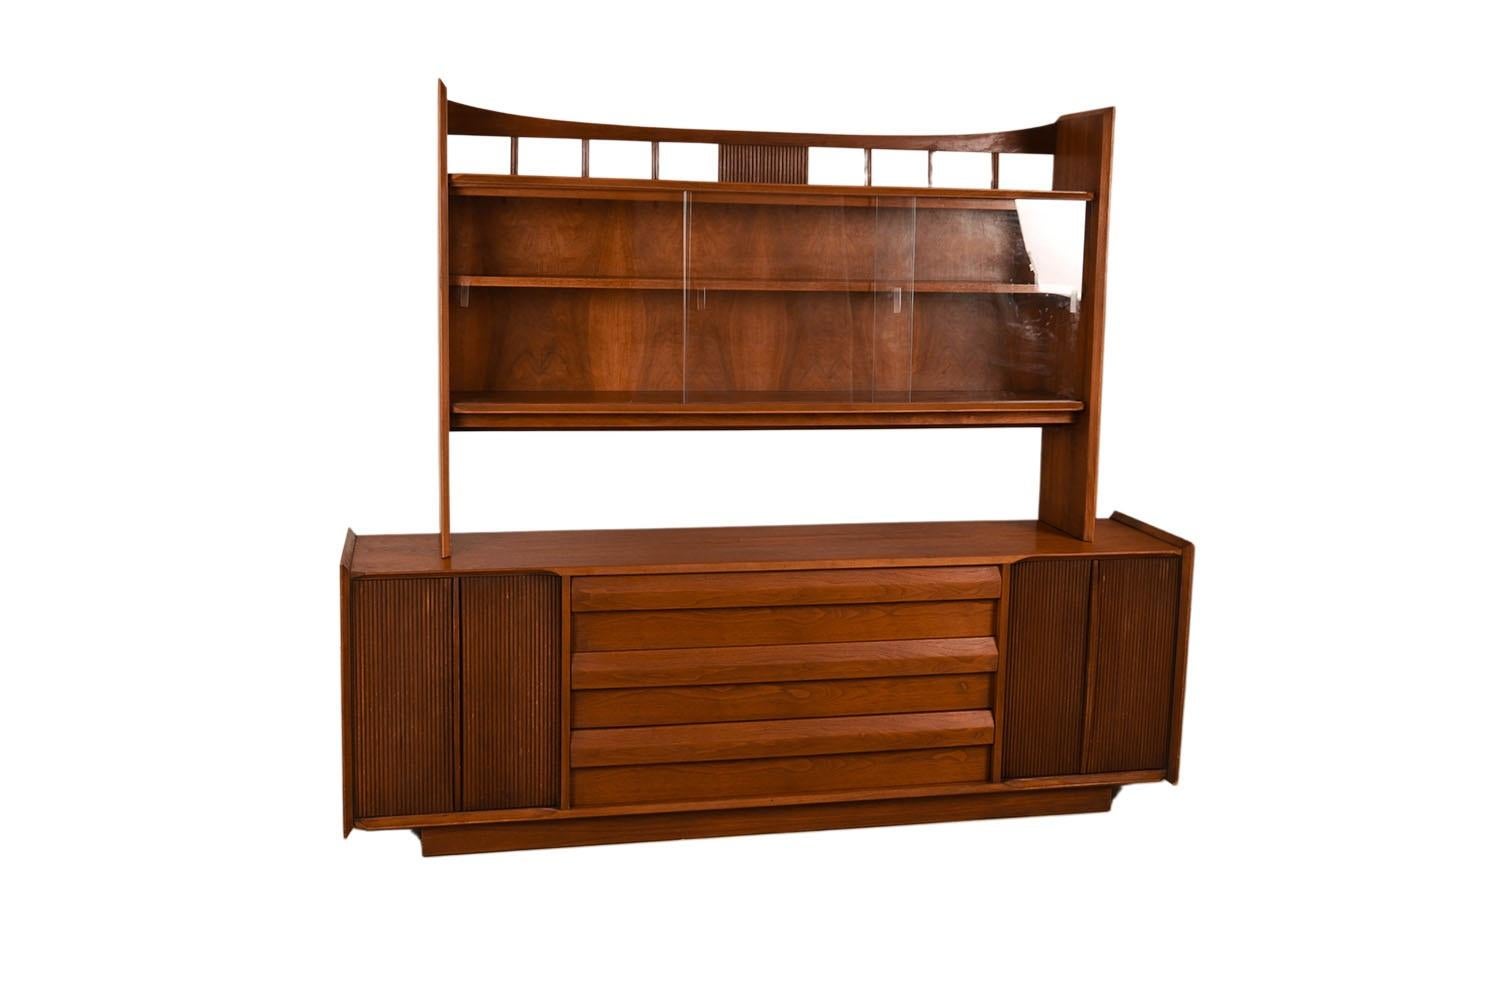 An elegant long Lane First Edition Mid-Century Modern sculpted walnut credenza/sideboard with detachable glass hutch. This is a beautiful example of Mid-Century craftsmanship by Lane Furniture Scandia line, First Edition Buffet Credenza, with